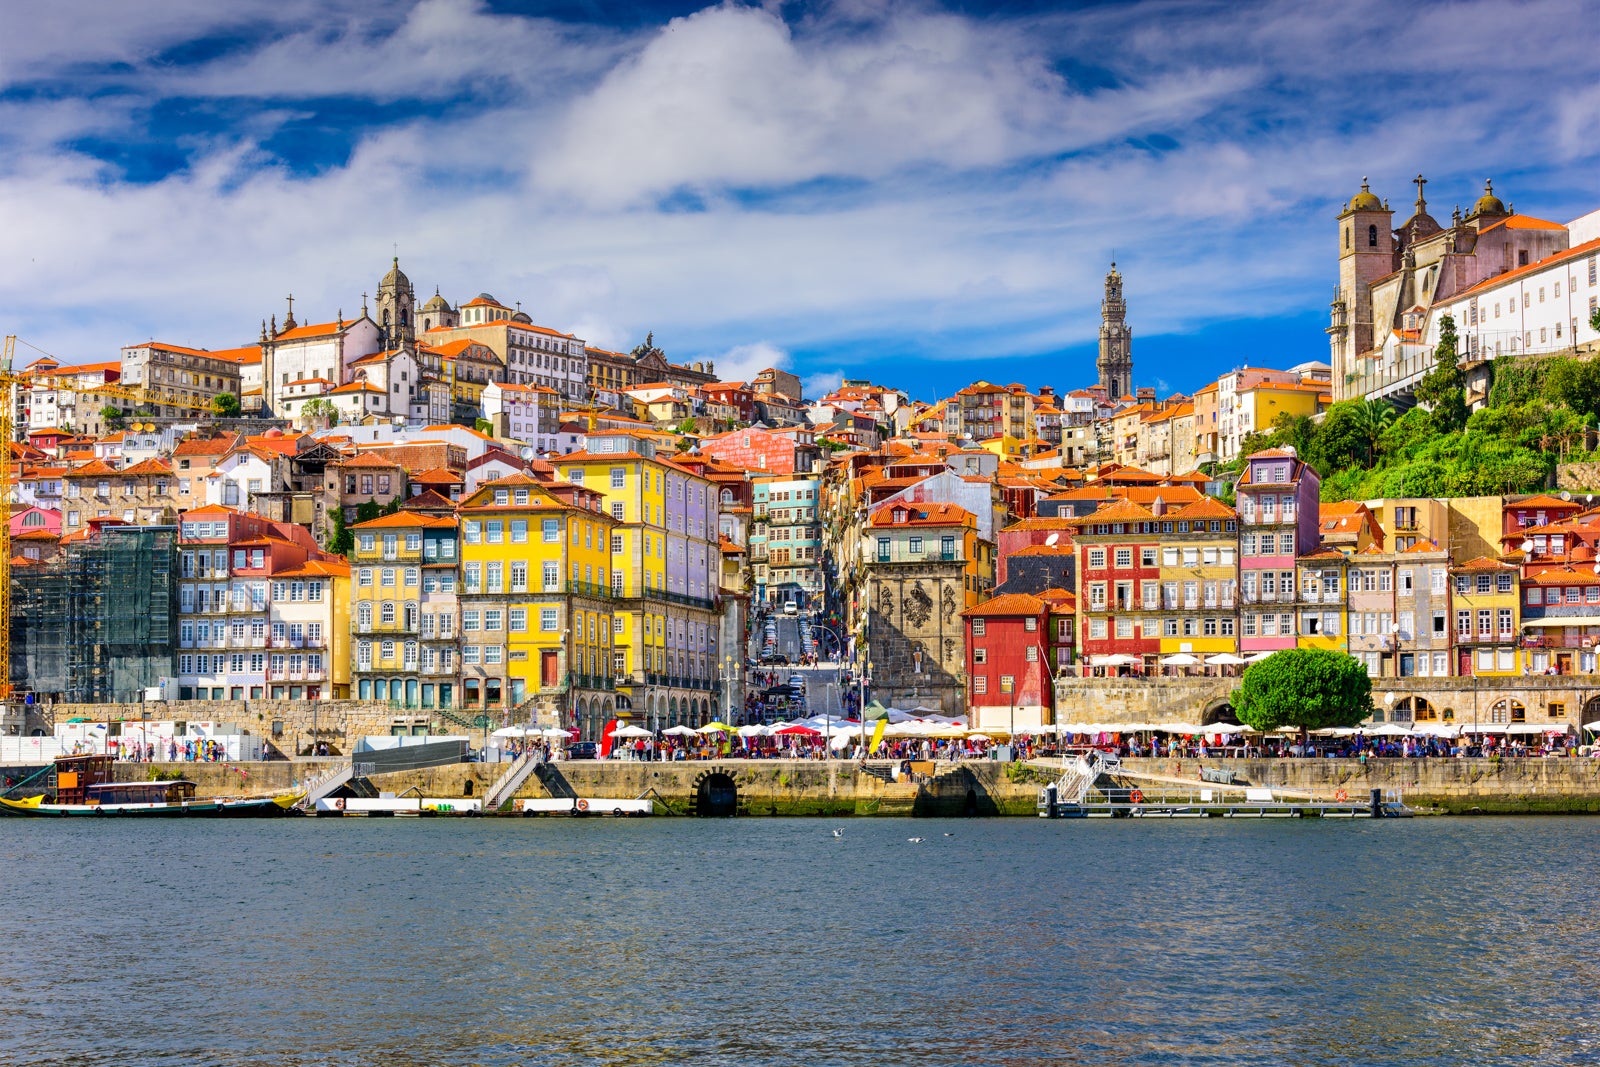 Porto, Portugal skyline from across the Douro River. (Photo by ESB Professional / Shutterstock)